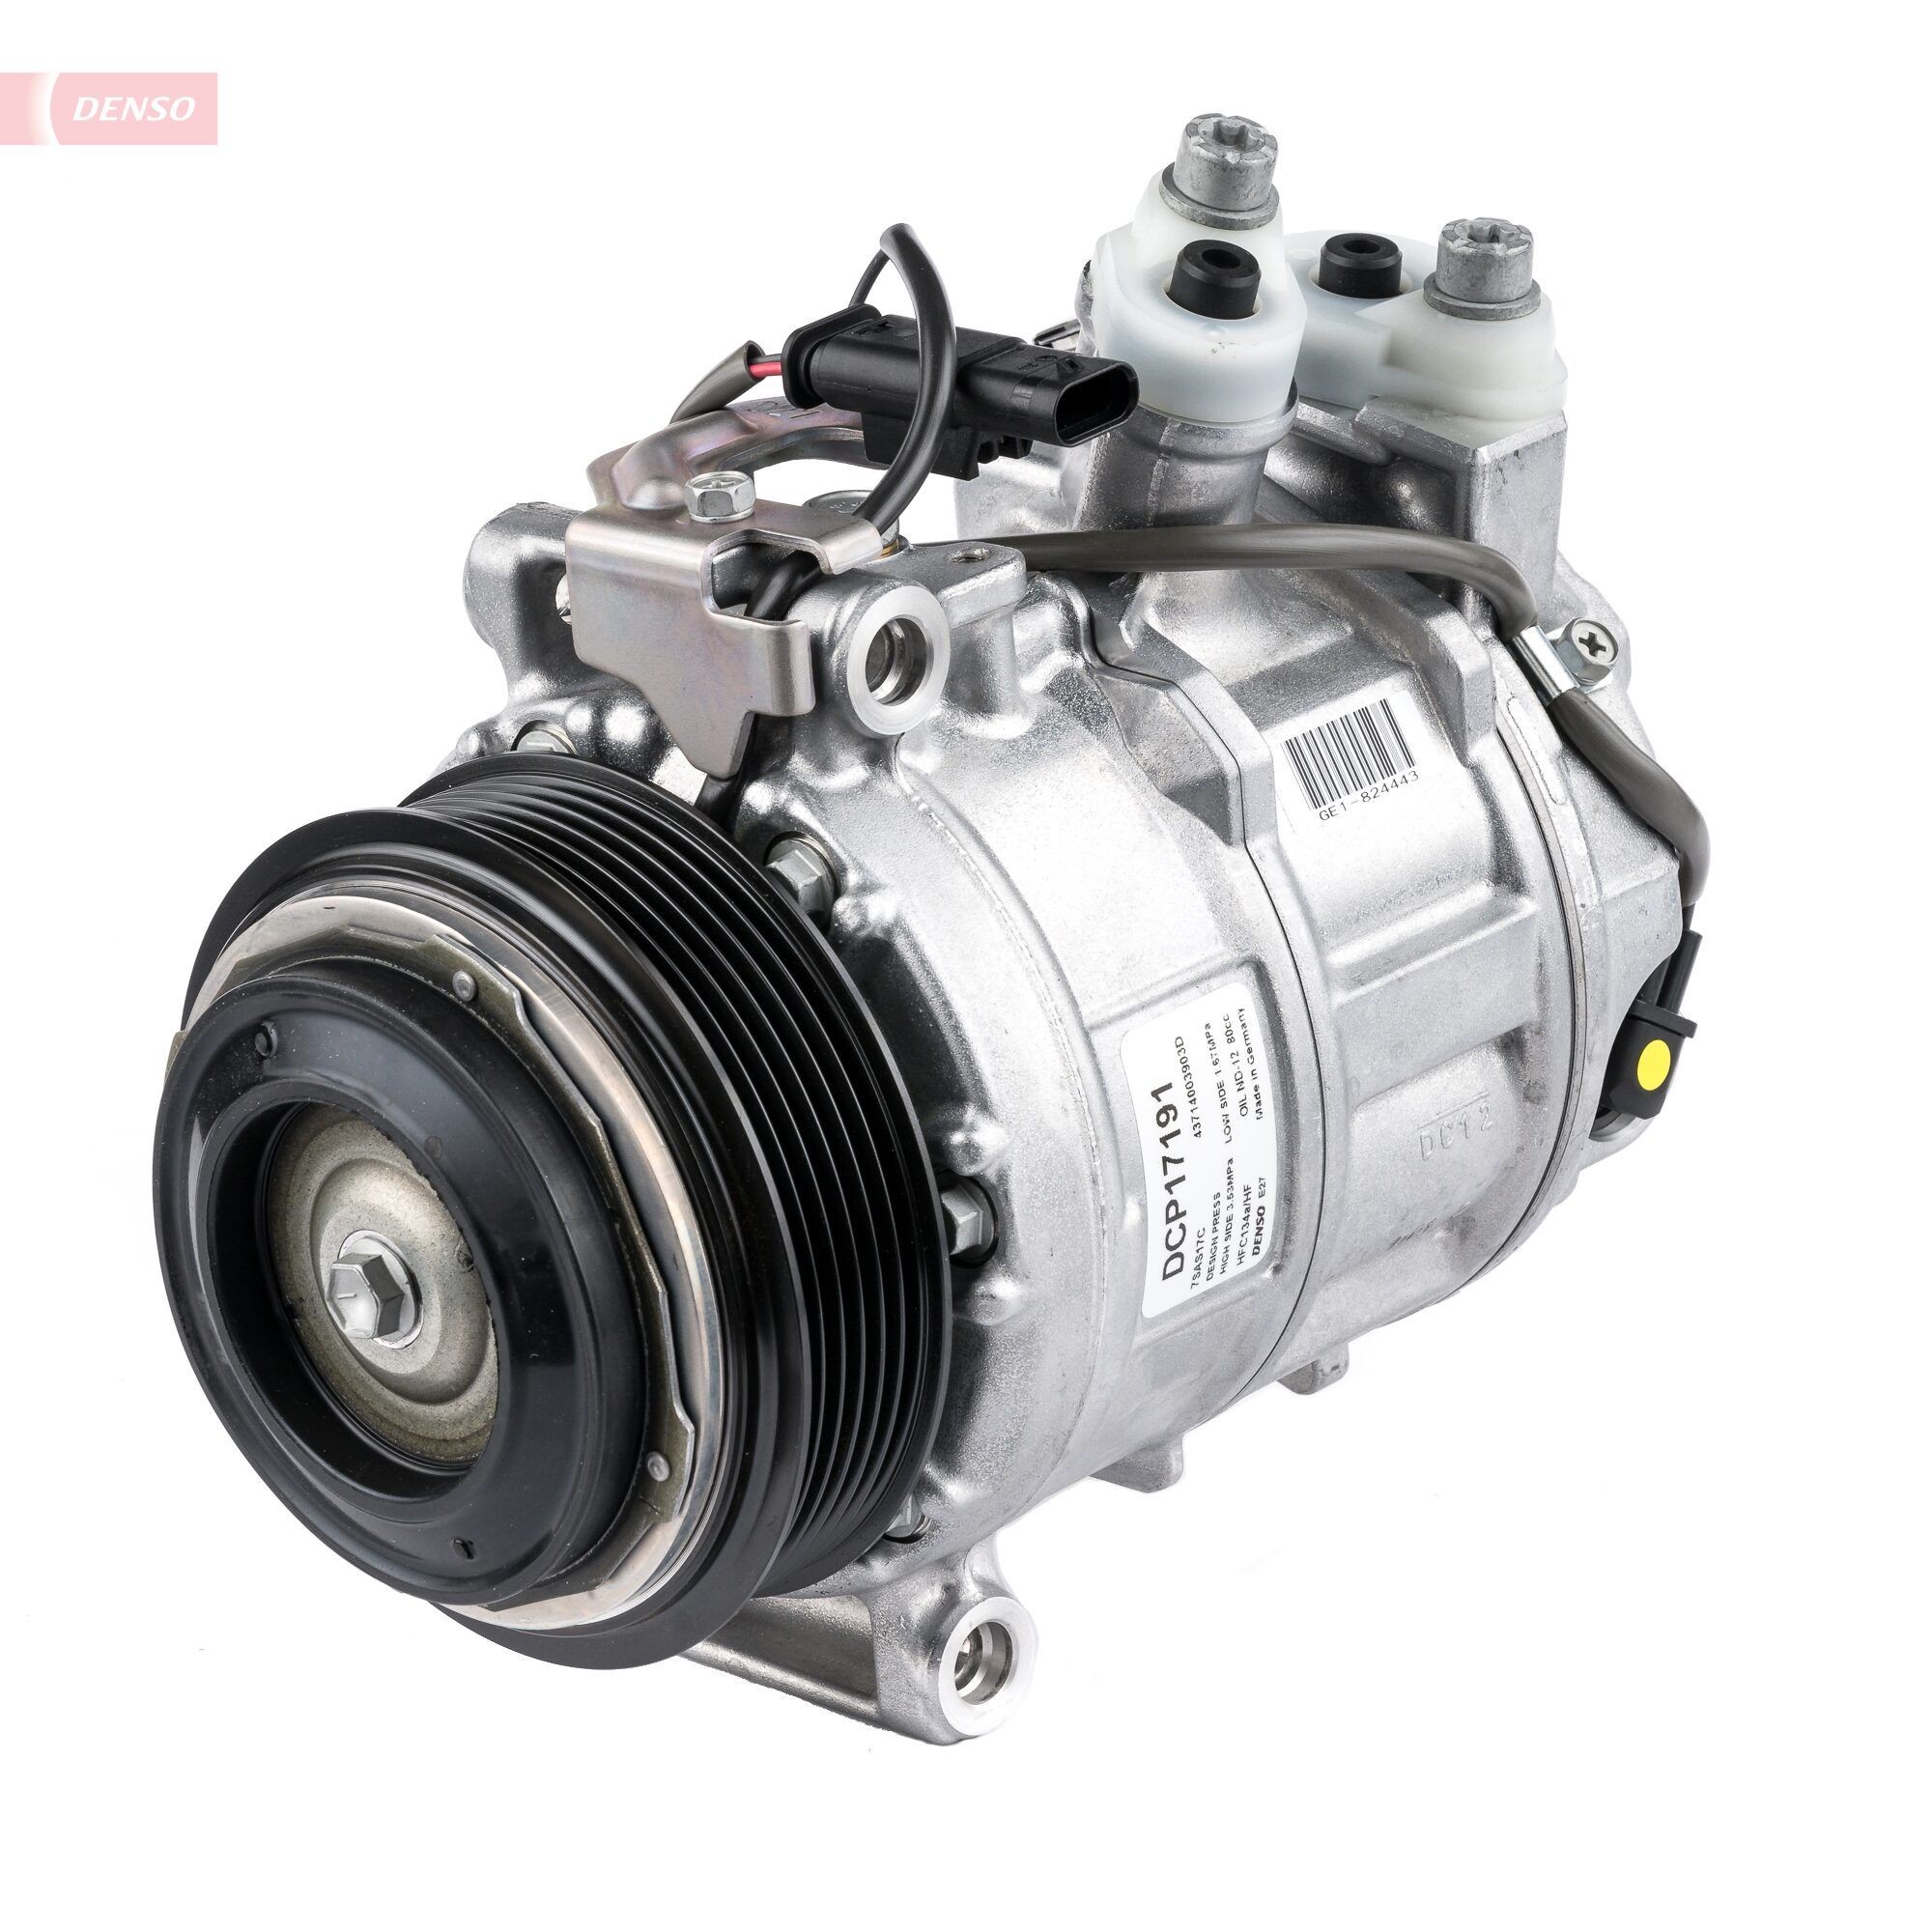 DENSO DCP17191 Air conditioning compressor 7SAS17C, 12V, PAG 46 YF, R 1234yf, R 134a, with magnetic clutch